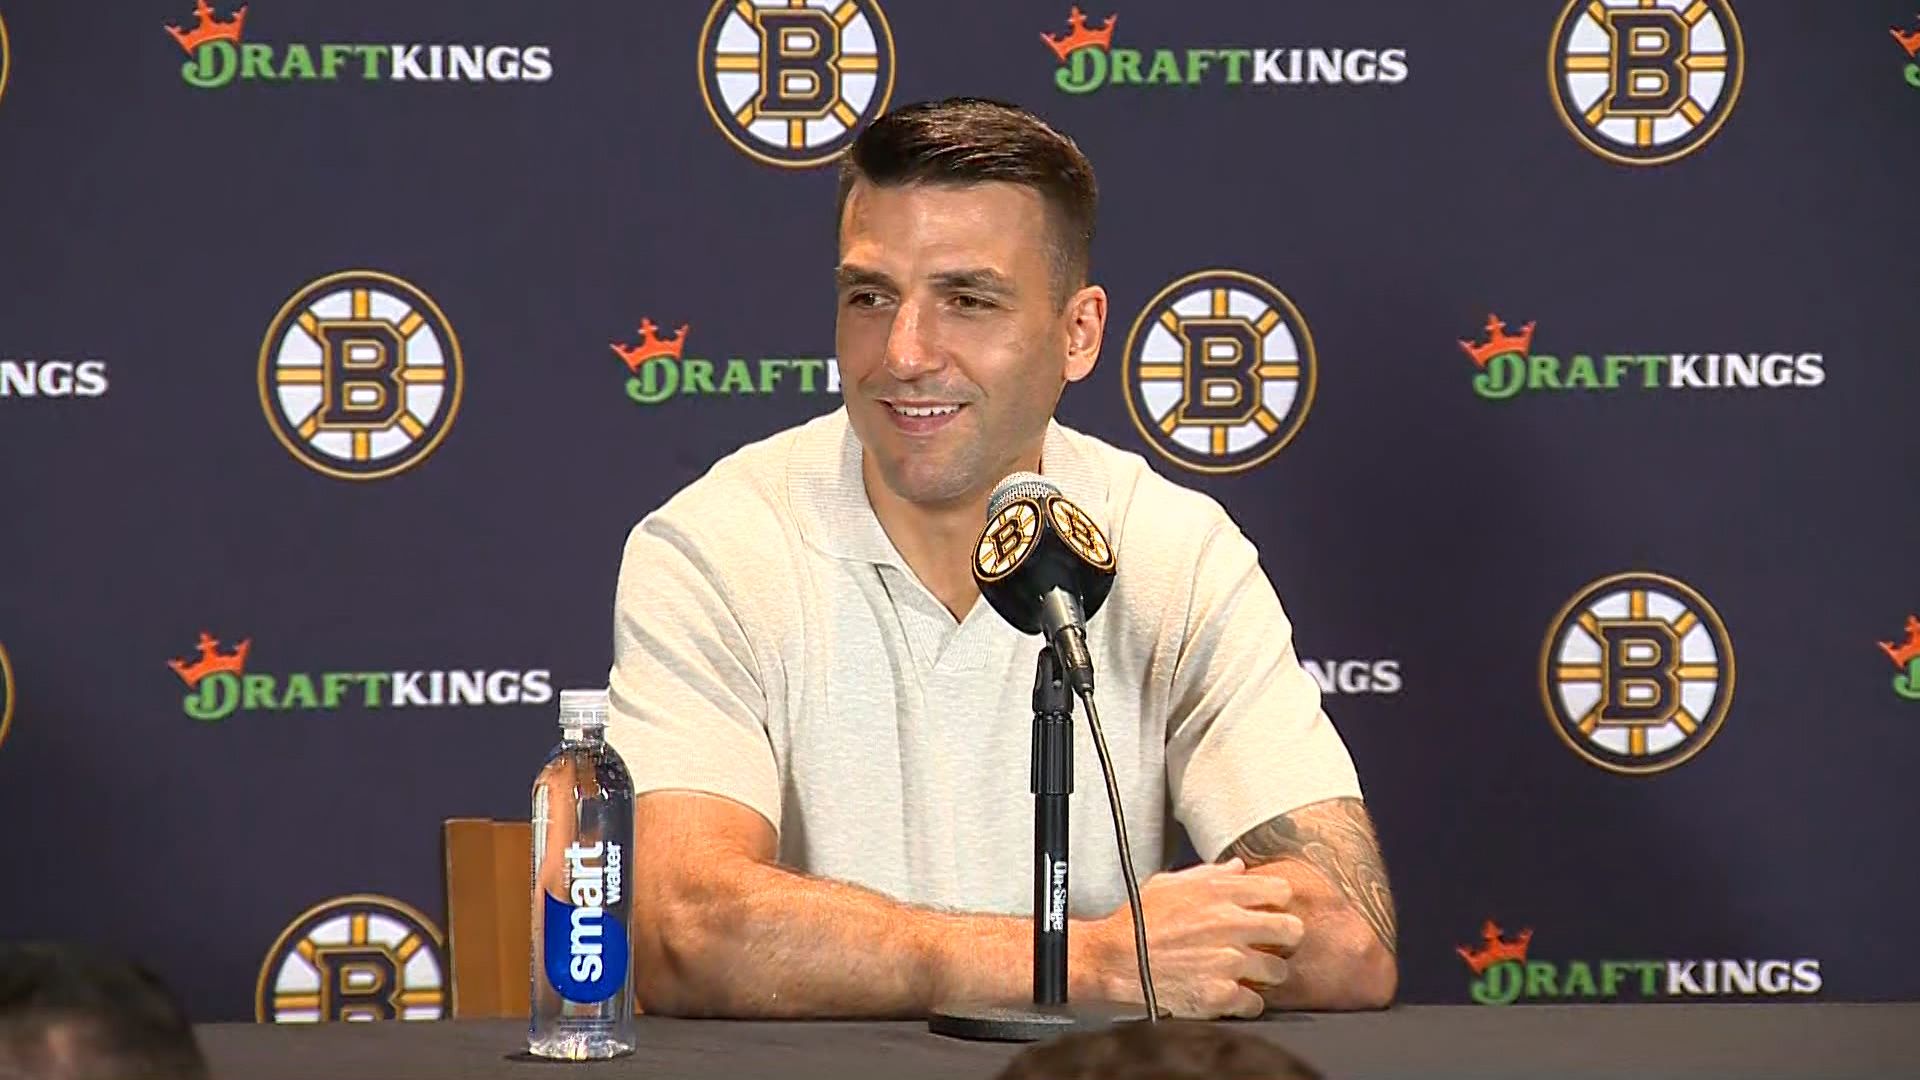 Bruins' Patrice Bergeron is retiring from the NHL